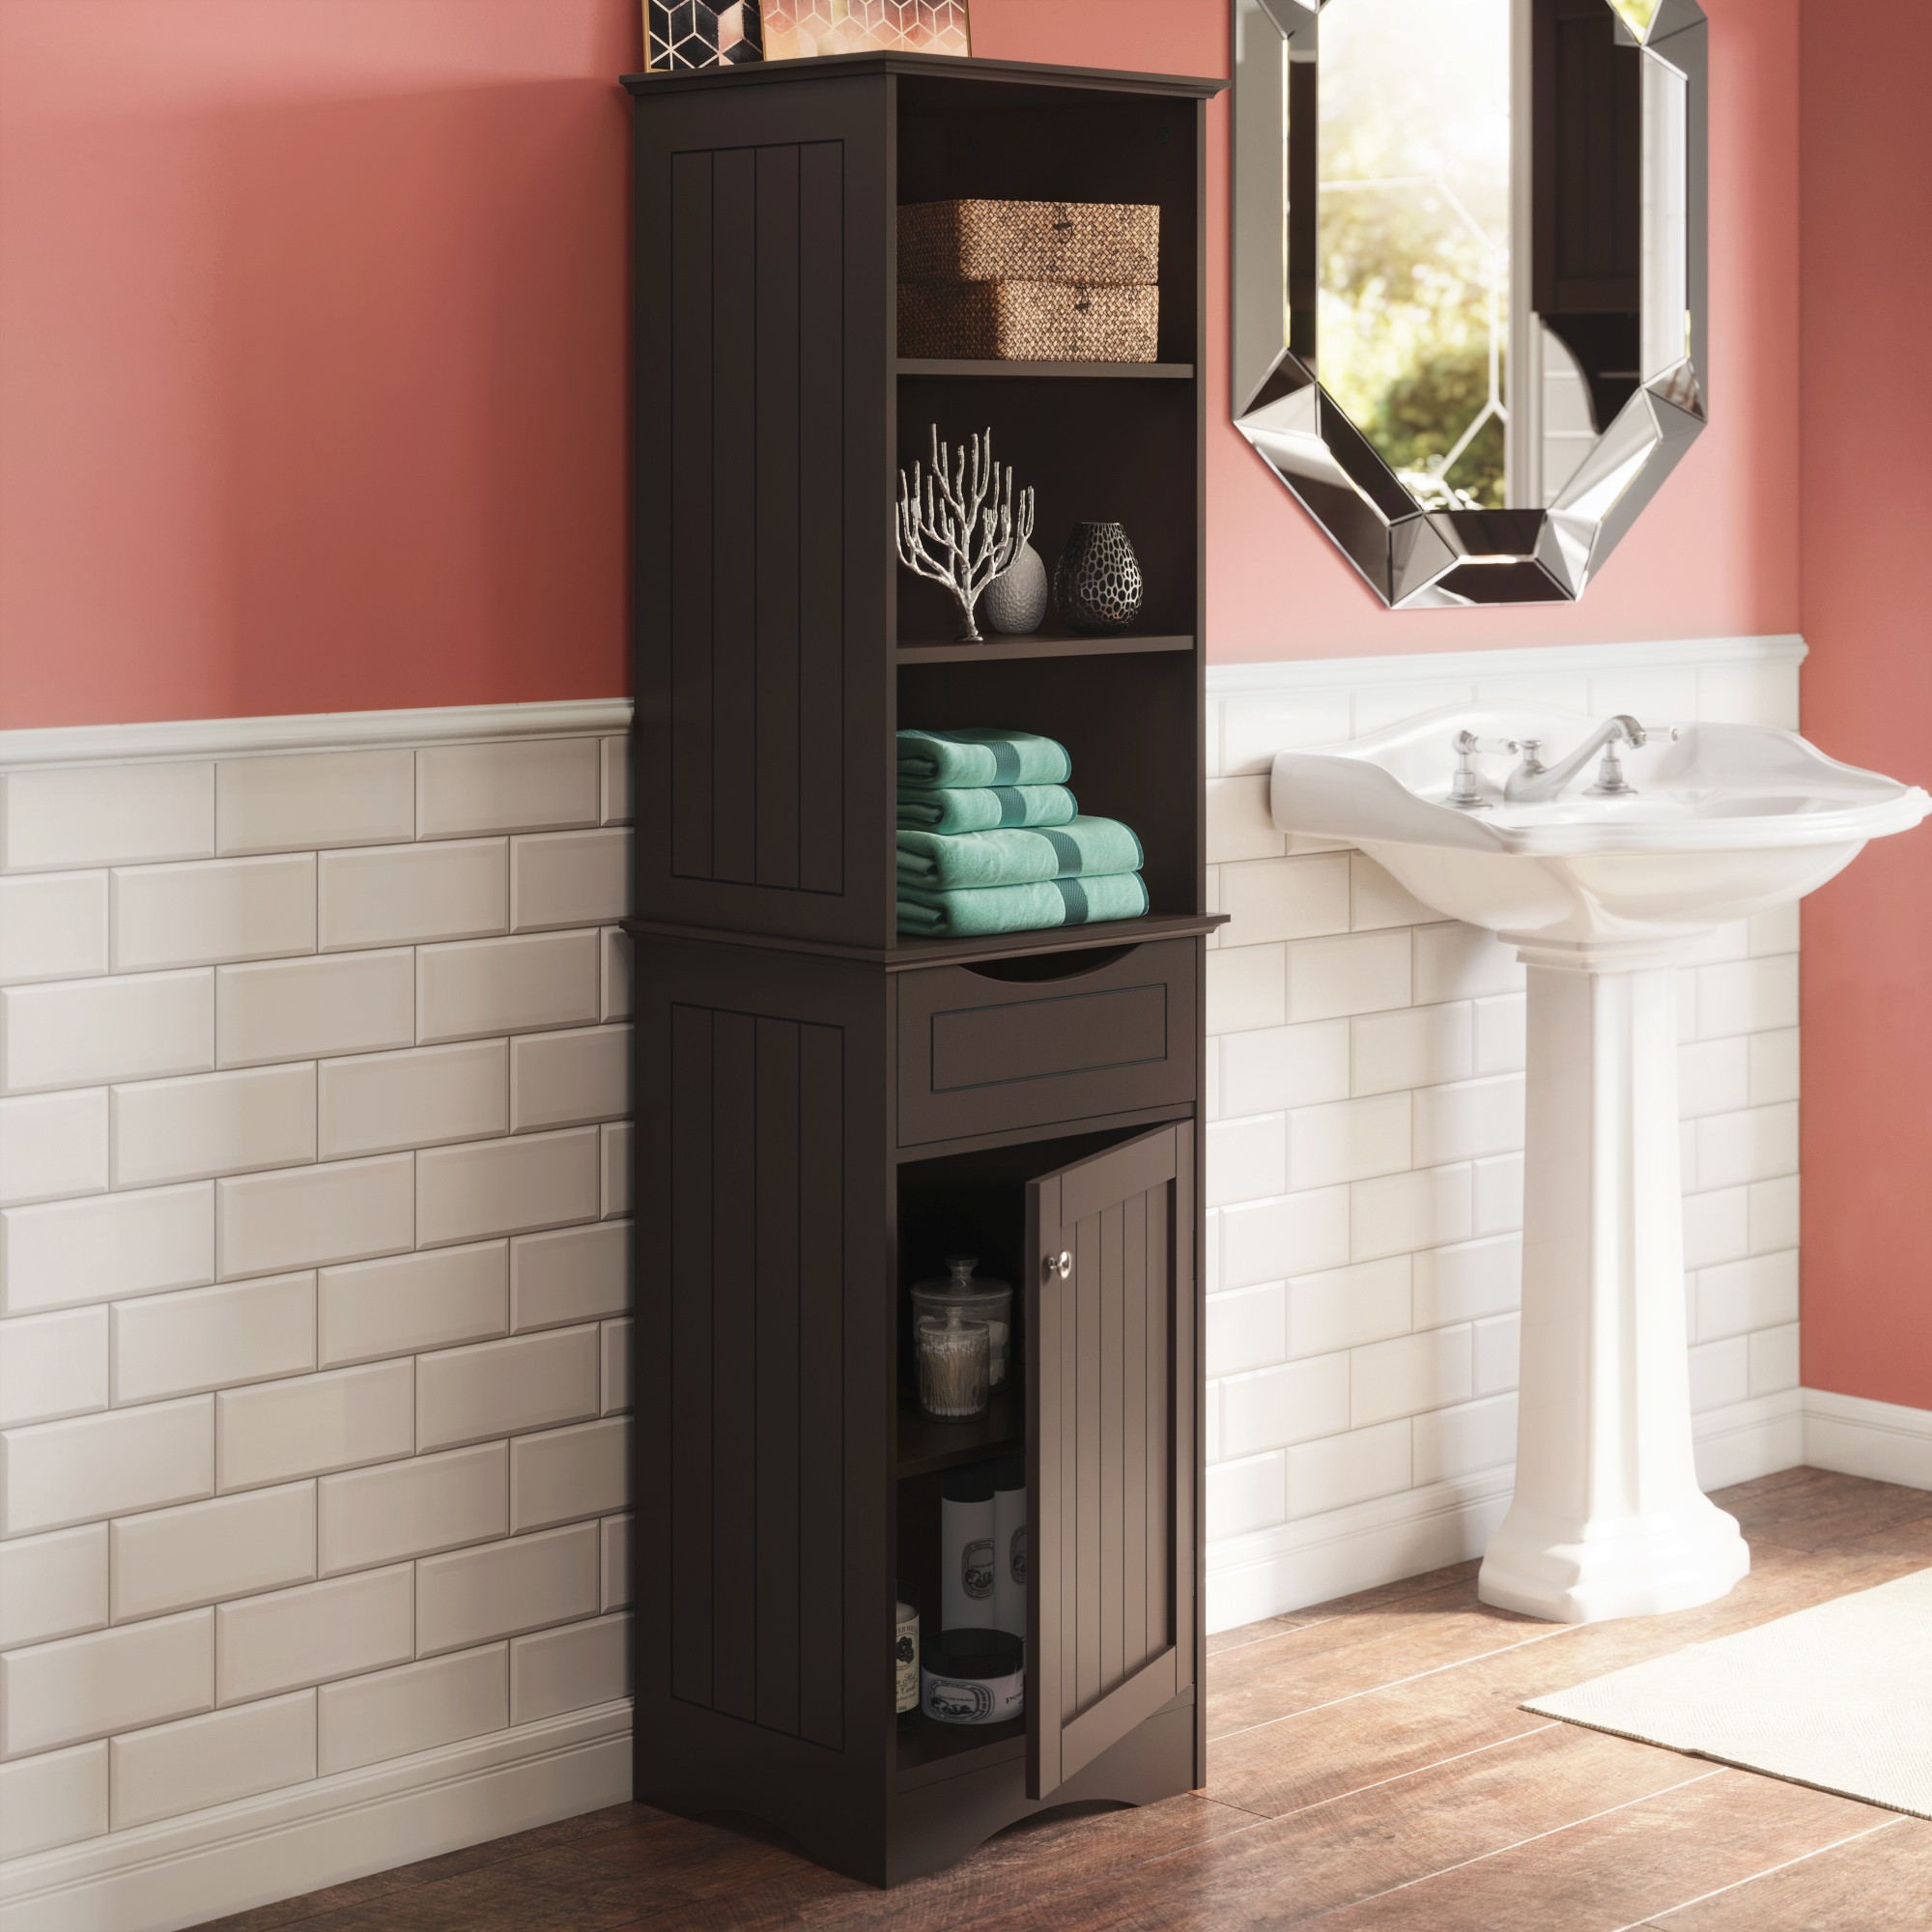 Tall Linen Cabinets For Bathroom - Ideas on Foter